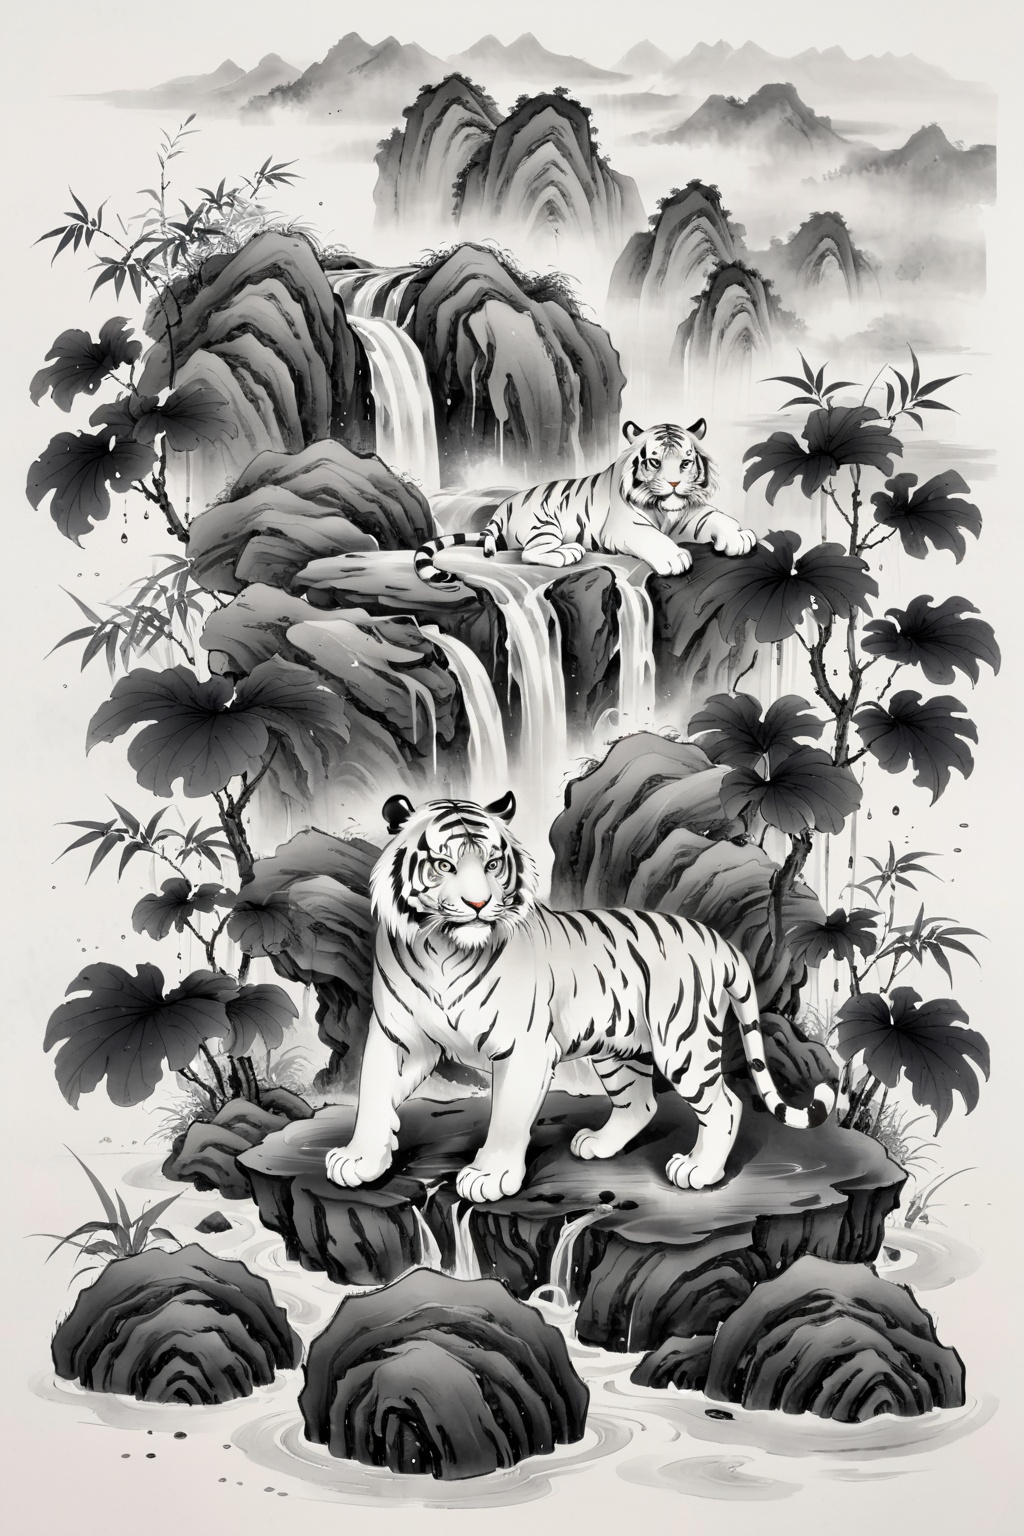 Best quality,8k,cg,falls,Rain,raindrops,Chinese ancientpaintings,traditional chinese ink painting,black and white ink painting,tiger,chinese meticulous ink,illustration,white background,centered,completed,<lora:工笔水墨:0.8>,